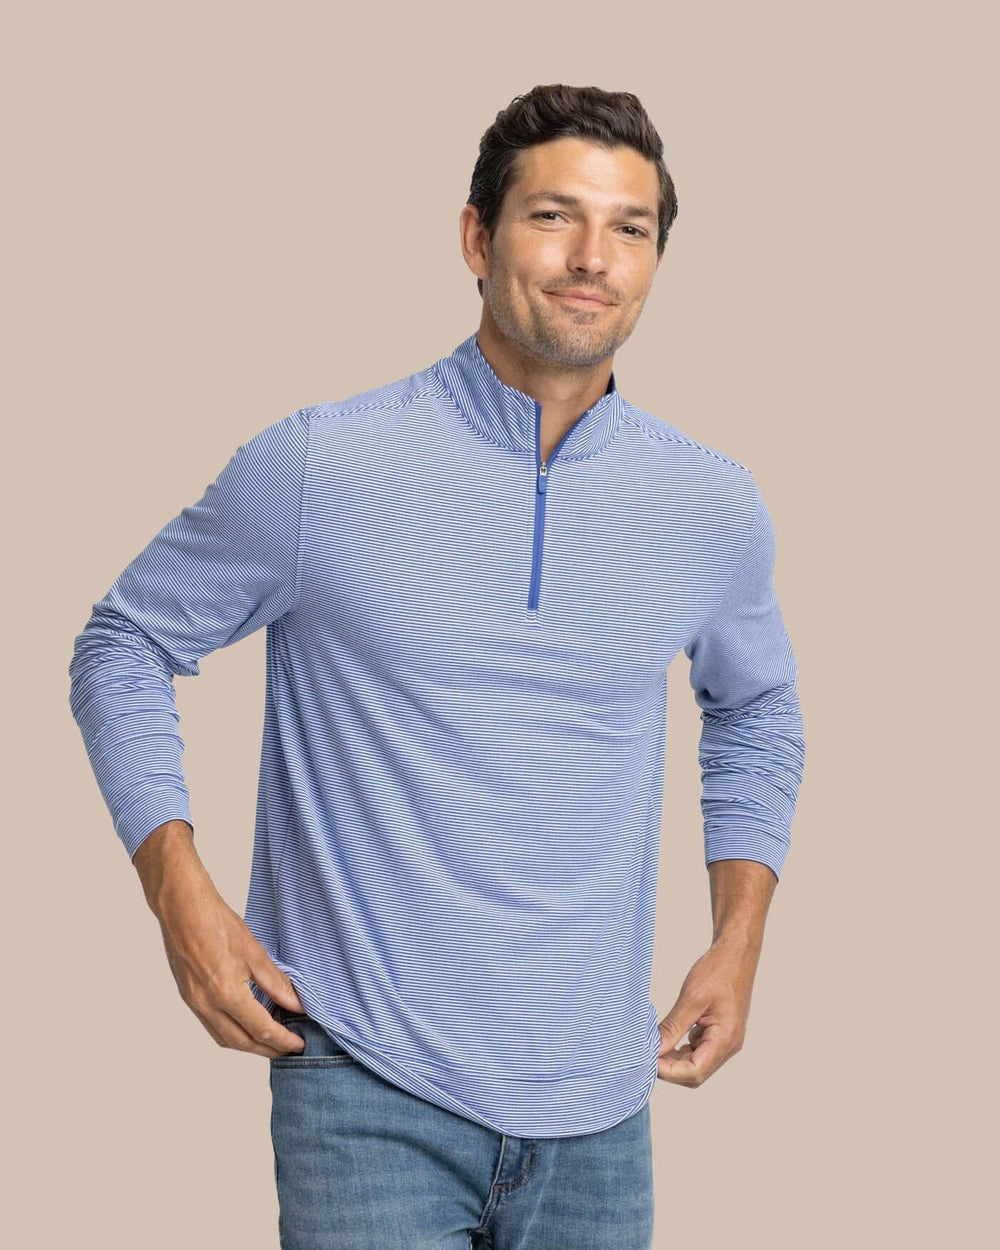 The front view of the Southern Tide Cruiser Micro-Stripe Heather Quarter Zip by Southern Tide - Heather University Blue